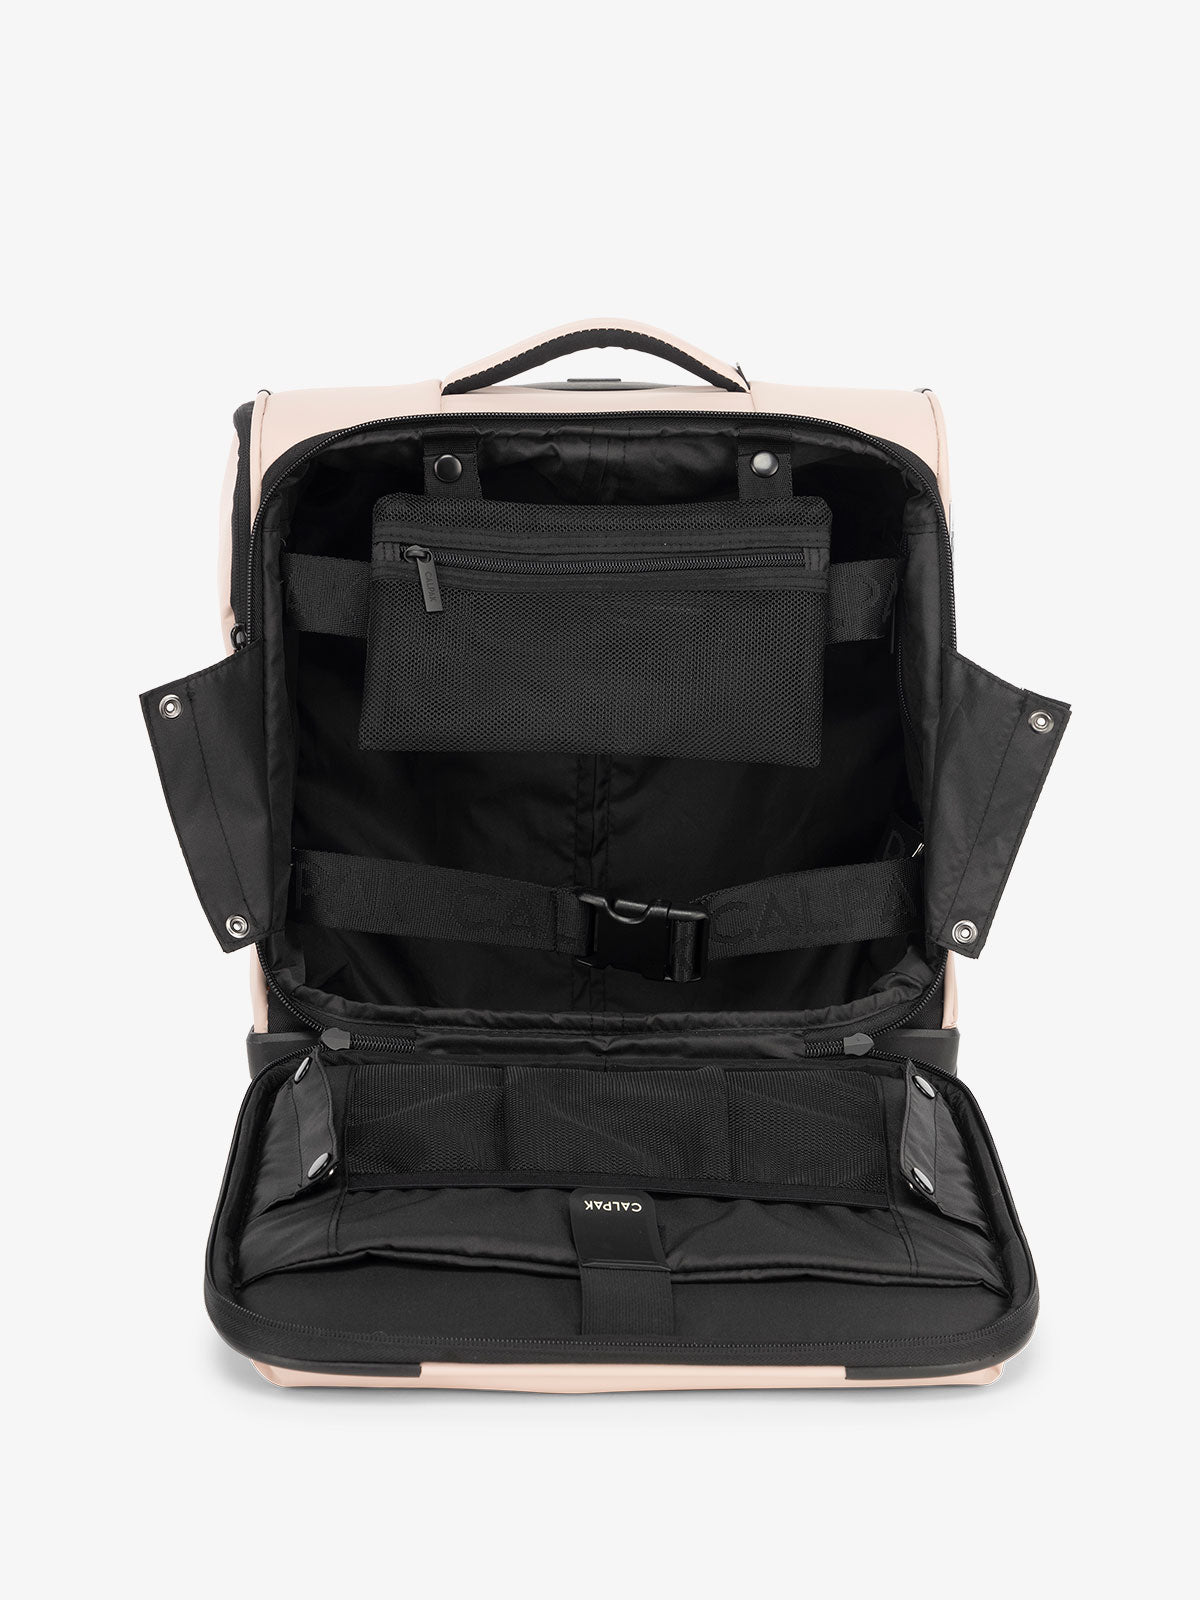 CALPAK Luka mini soft sided carry-on suitcase with laptop compartment and multiple interior pockets in rose quartz